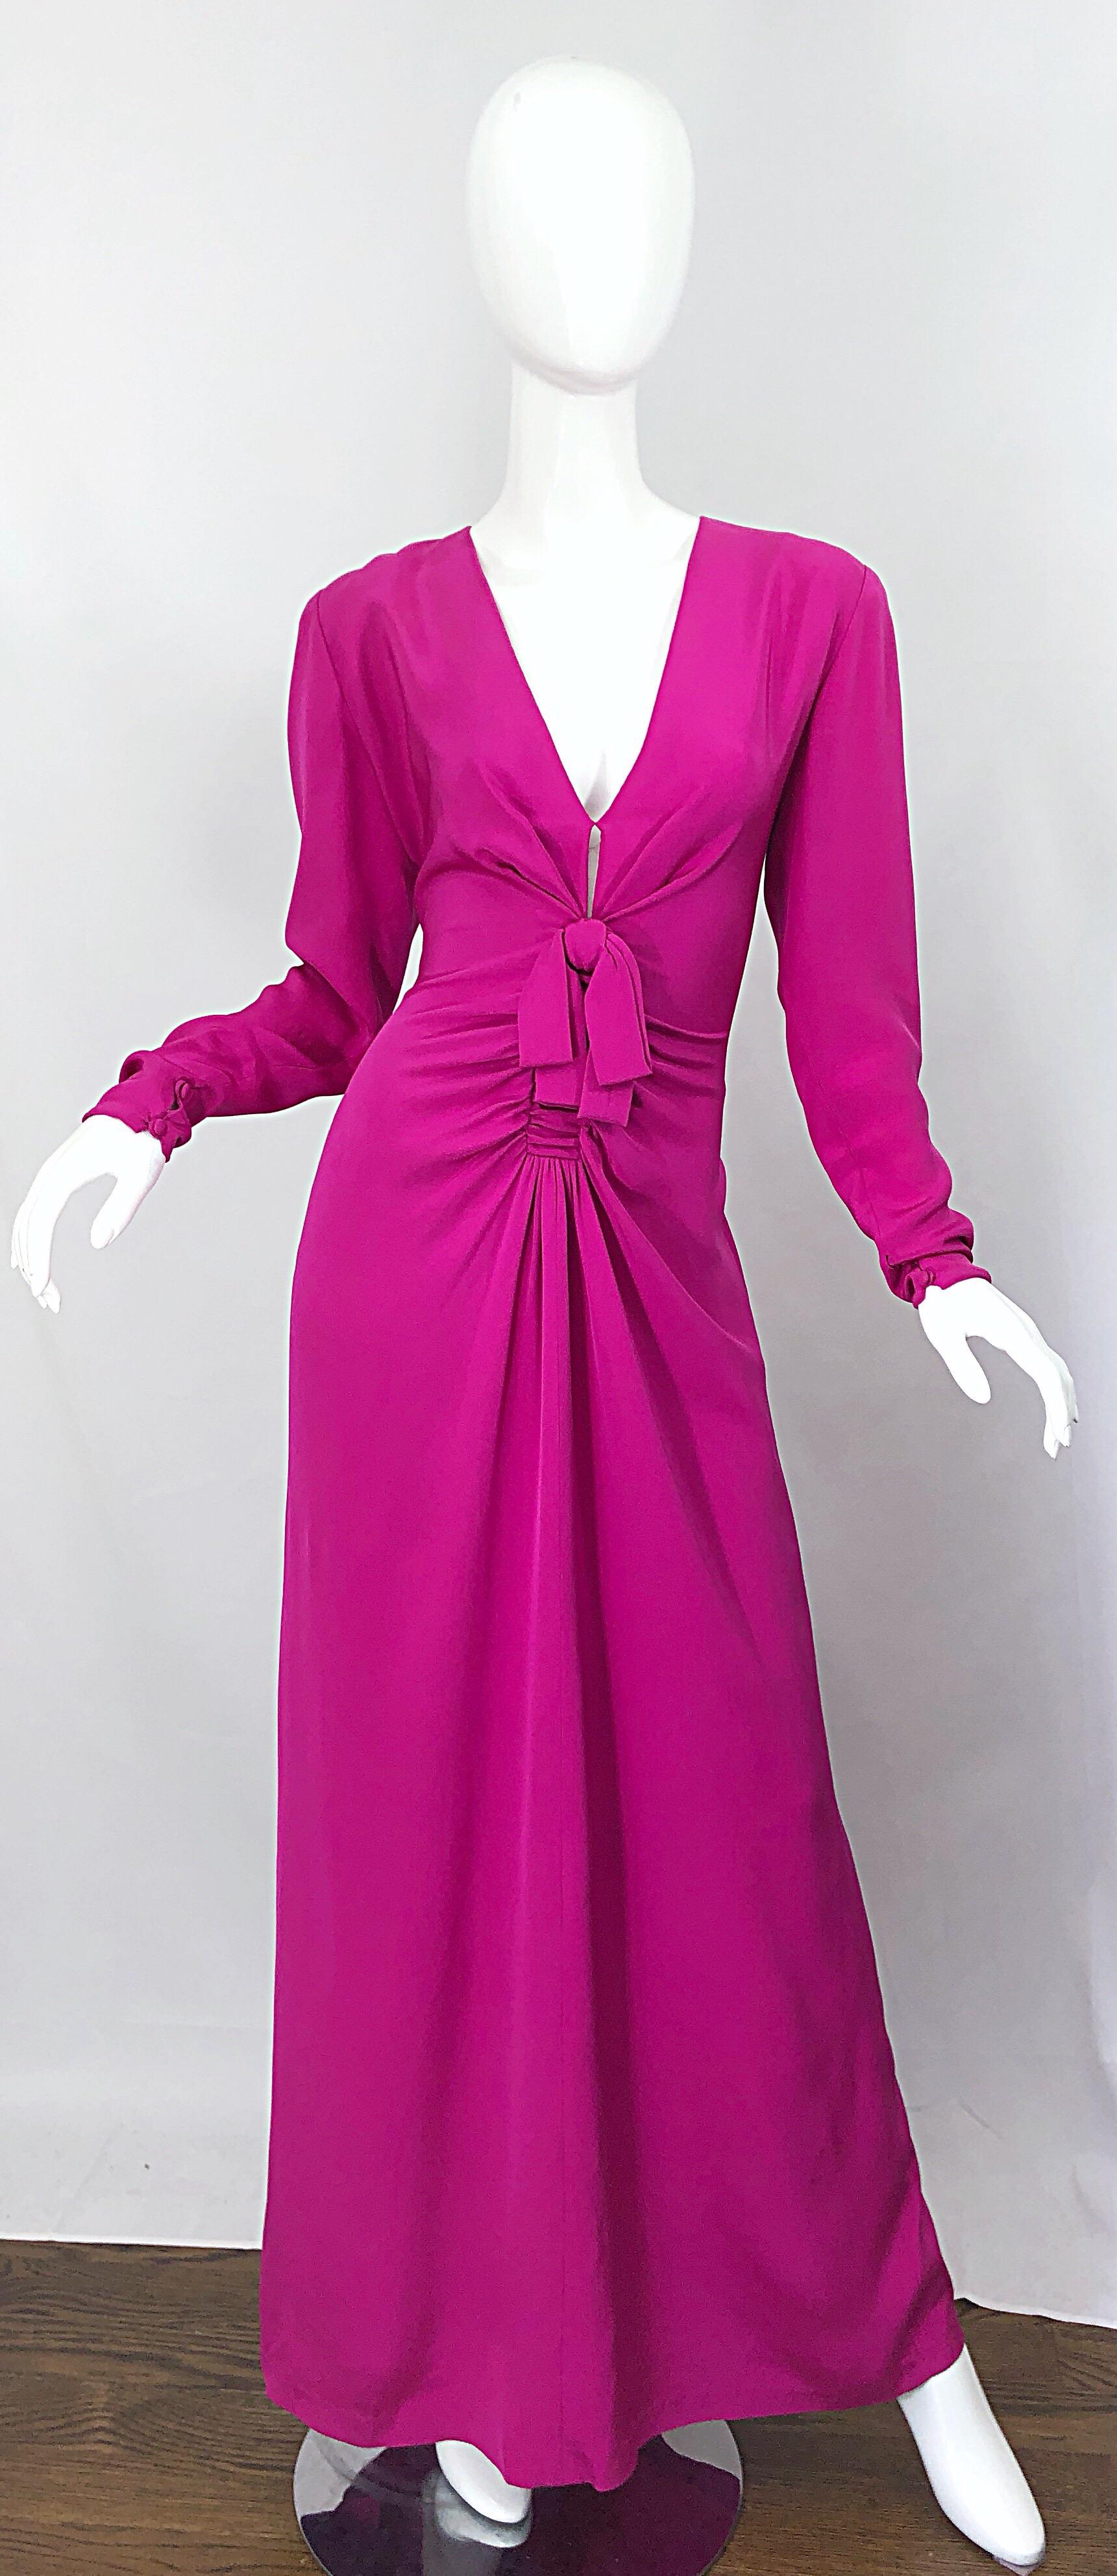 Stunning vintage BILL BLASS for NEIMAN MARCUS Couture quality hot pink / magenta fuchsia long sleeve silk jersey cut-out evening gown! Features a fitted bodice with flattering ruched detail at the waist. Cut-out at center bust reveals just the